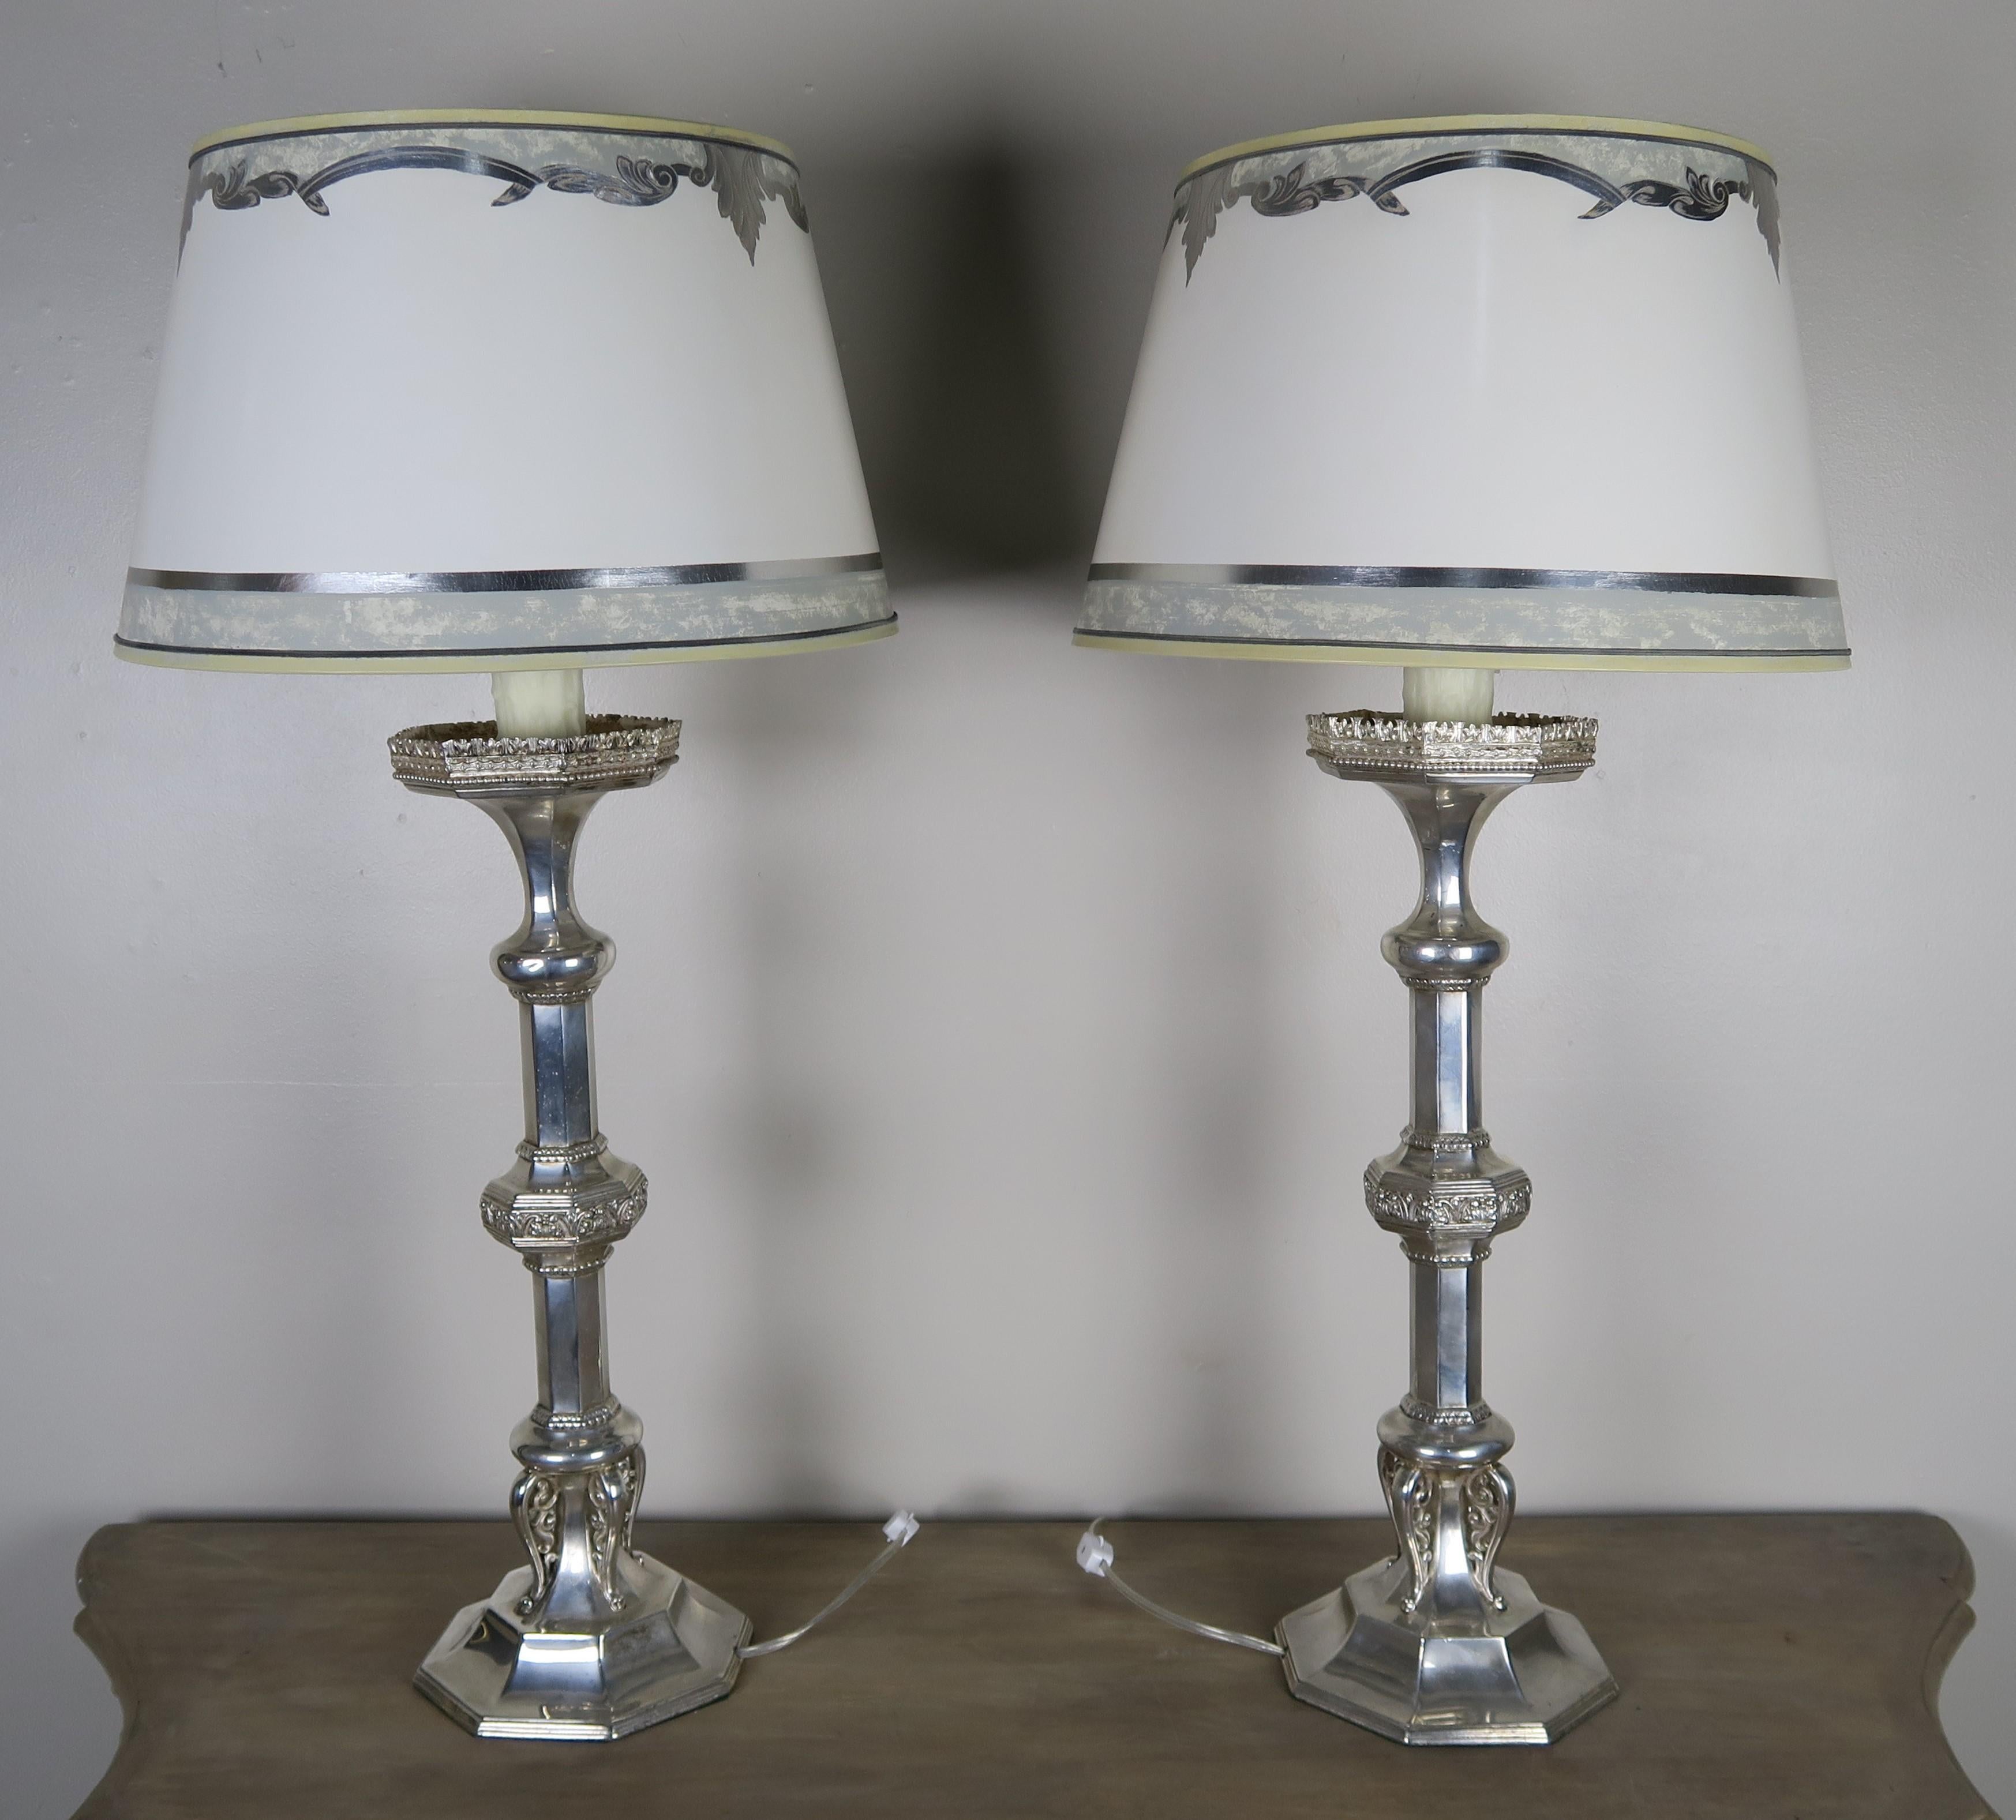 Pair of English Sheffield silver plated lamps with custom hand painted parchment shades. The handwork is beautiful including beading and intricate detailing throughout. The candlesticks stand on octagonal bases that mimicks the octagonal bobeches.